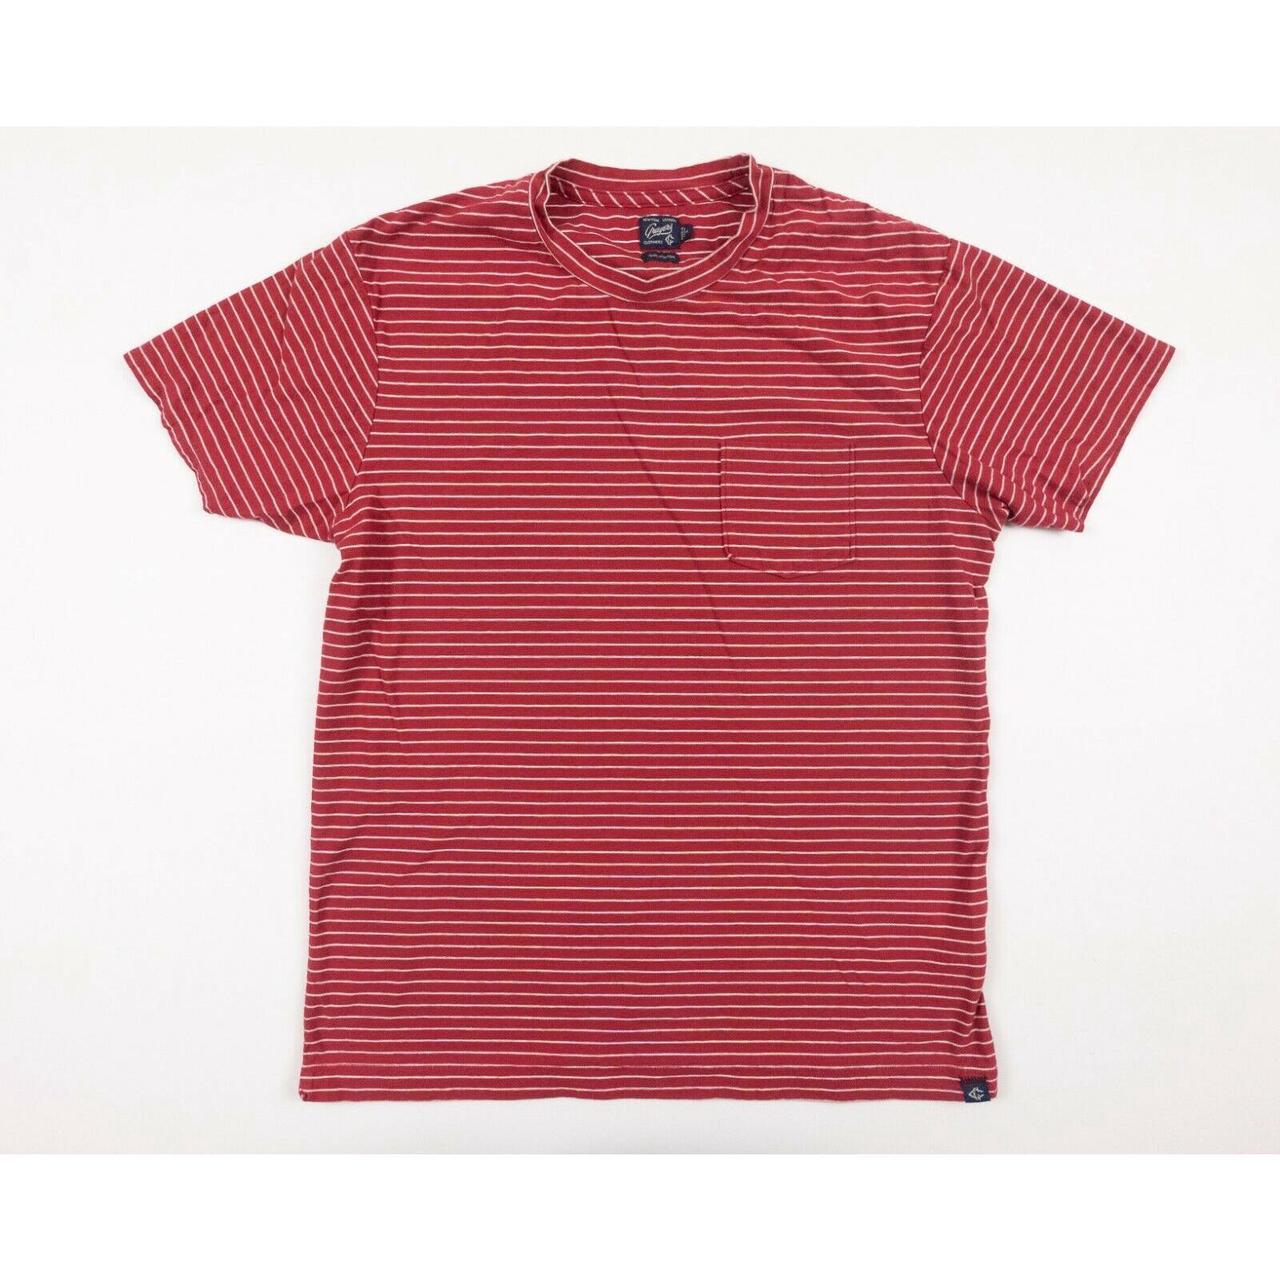 Product Image 1 - Grayer Shirt Adult Large Red